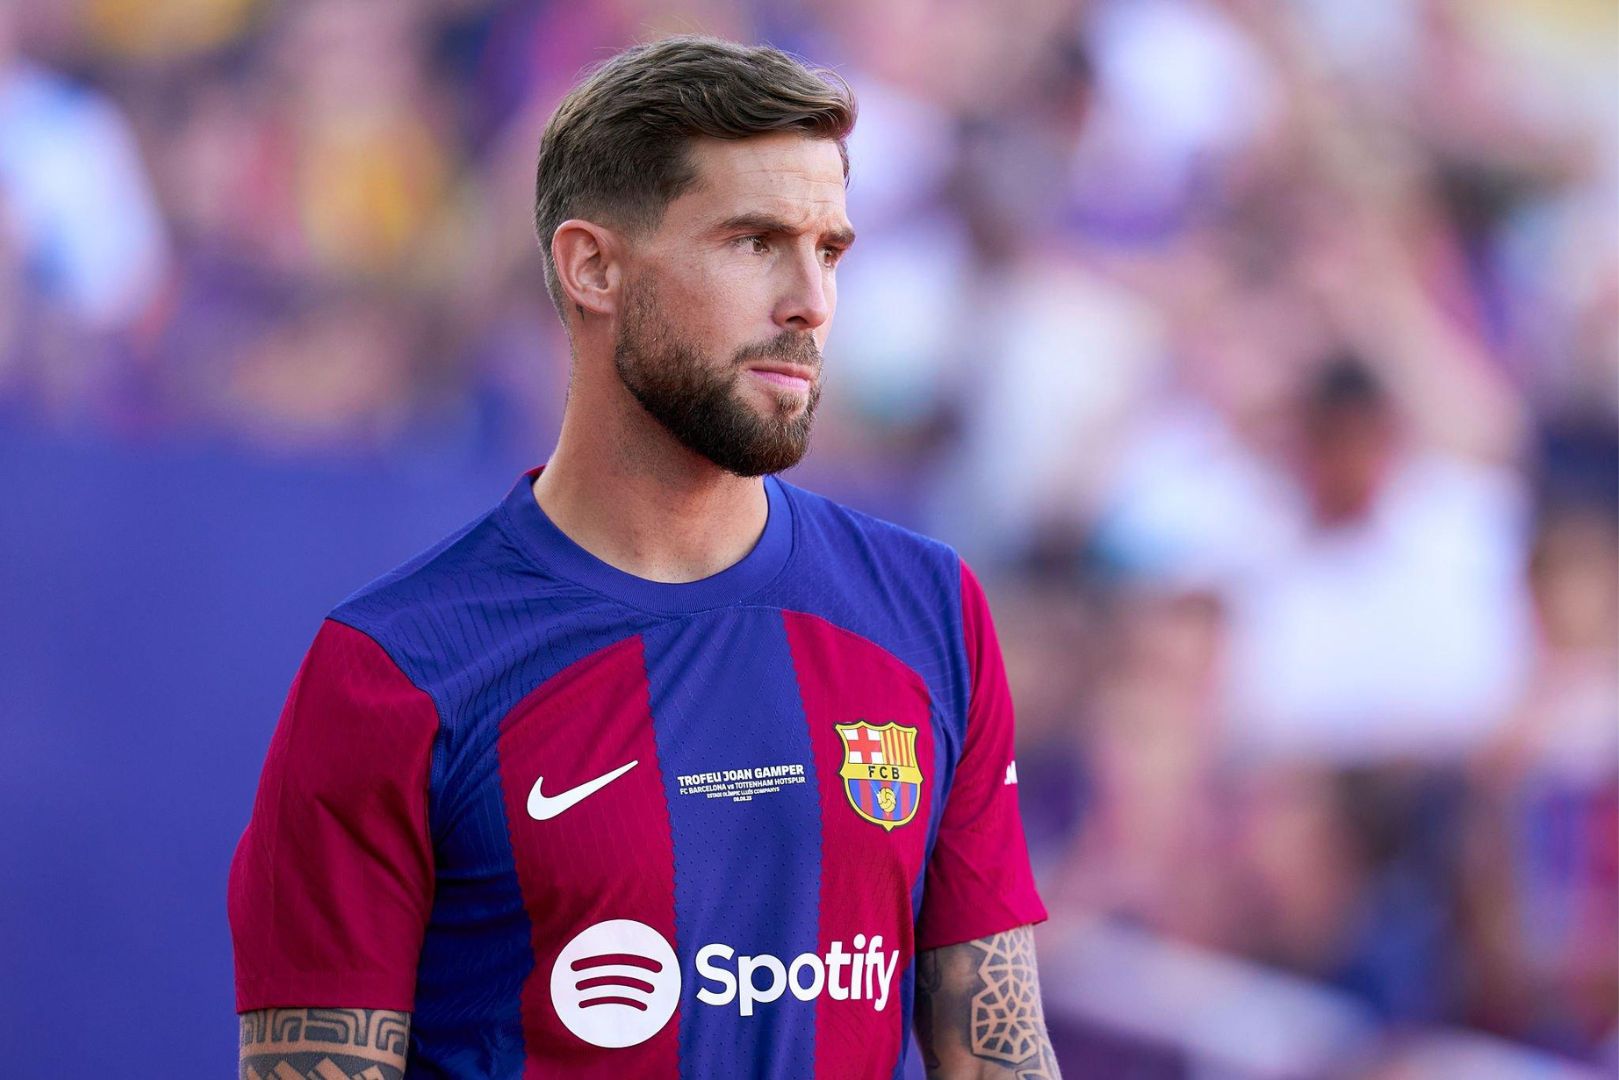 BARCELONA, SPAIN - AUGUST 08: Inigo Martinez of FC Barcelona comes onto the pitch ahead the Joan Gamper Trophy match between FC Barcelona and Tottenham Hotspur at Estadi Olimpic Lluis Companys on August 08, 2023 in Barcelona, Spain.